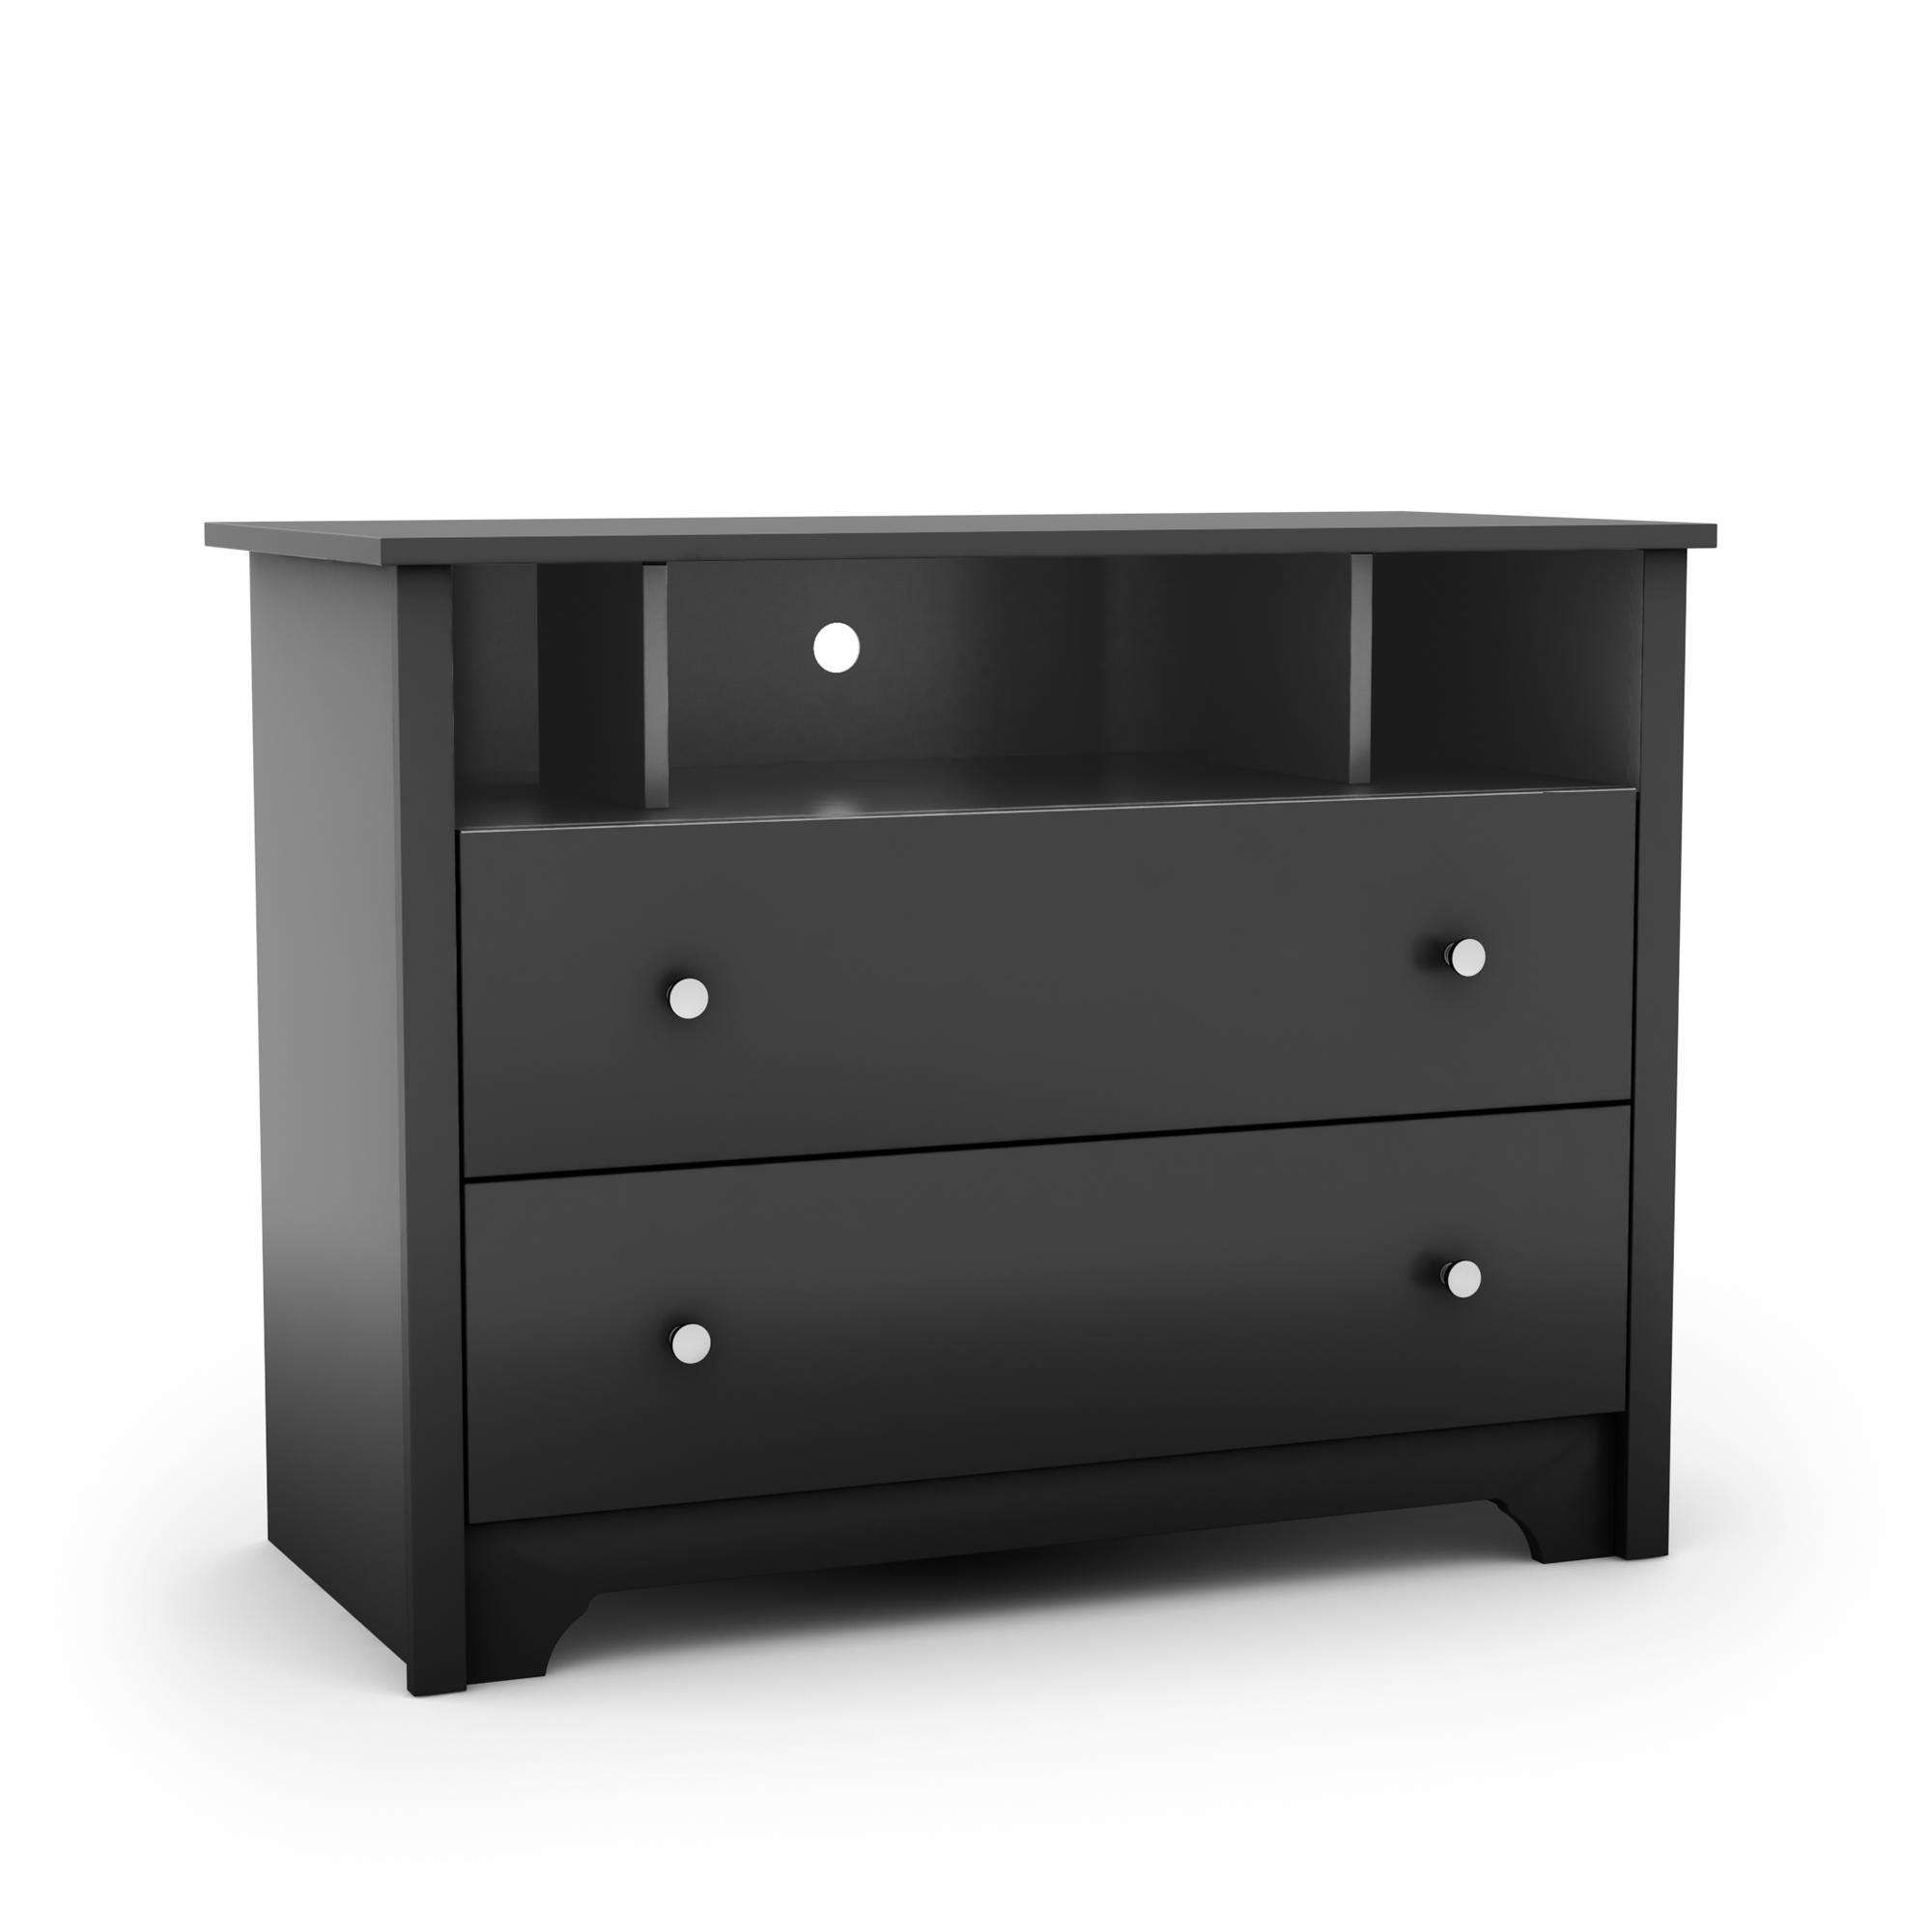 Square Black Tv Stand With Storage Drawers And Shelves Of Cool Tv Throughout Black Tv Stands With Drawers (View 2 of 15)